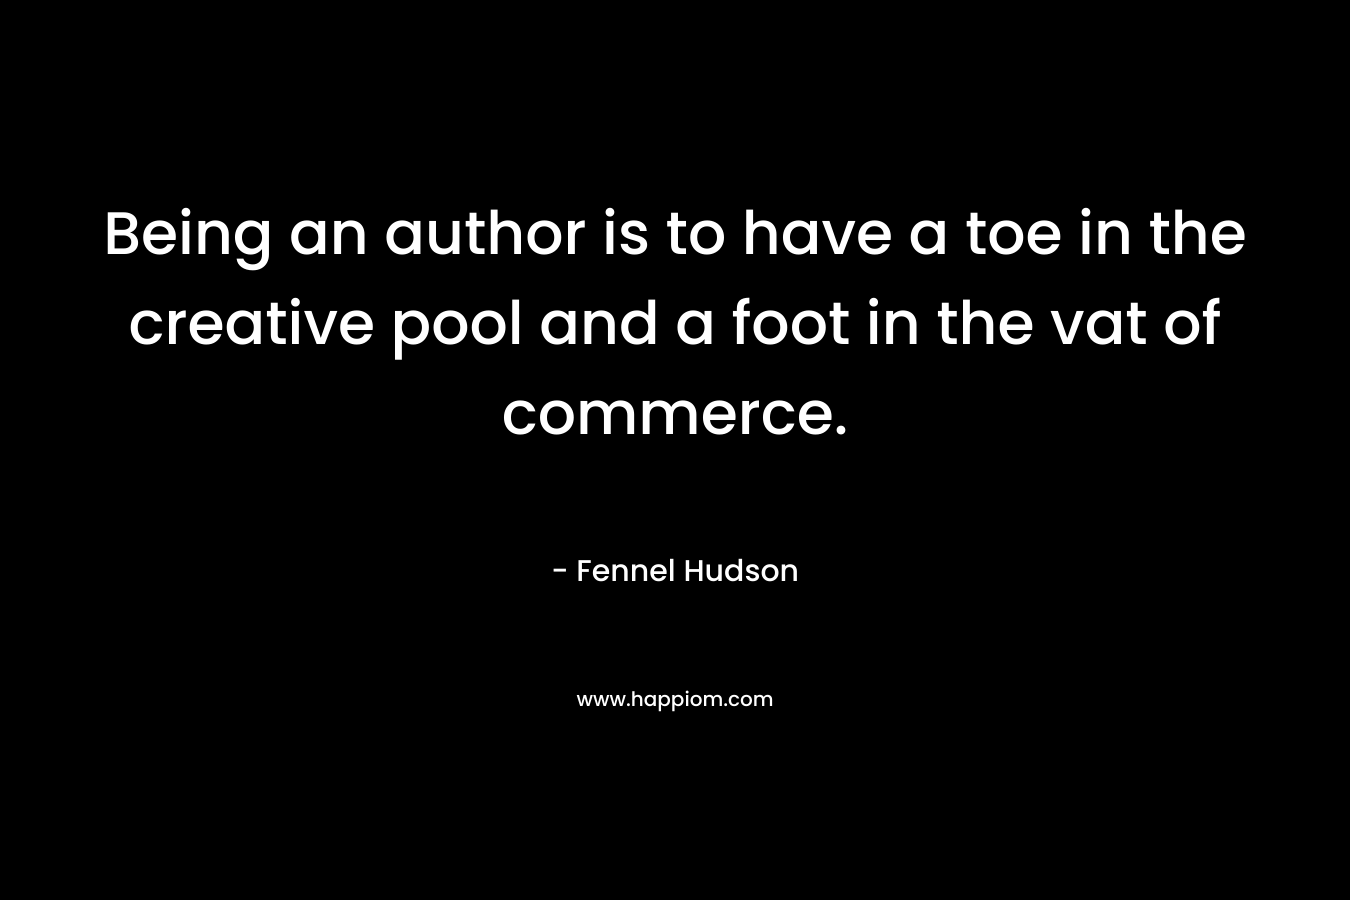 Being an author is to have a toe in the creative pool and a foot in the vat of commerce. – Fennel Hudson